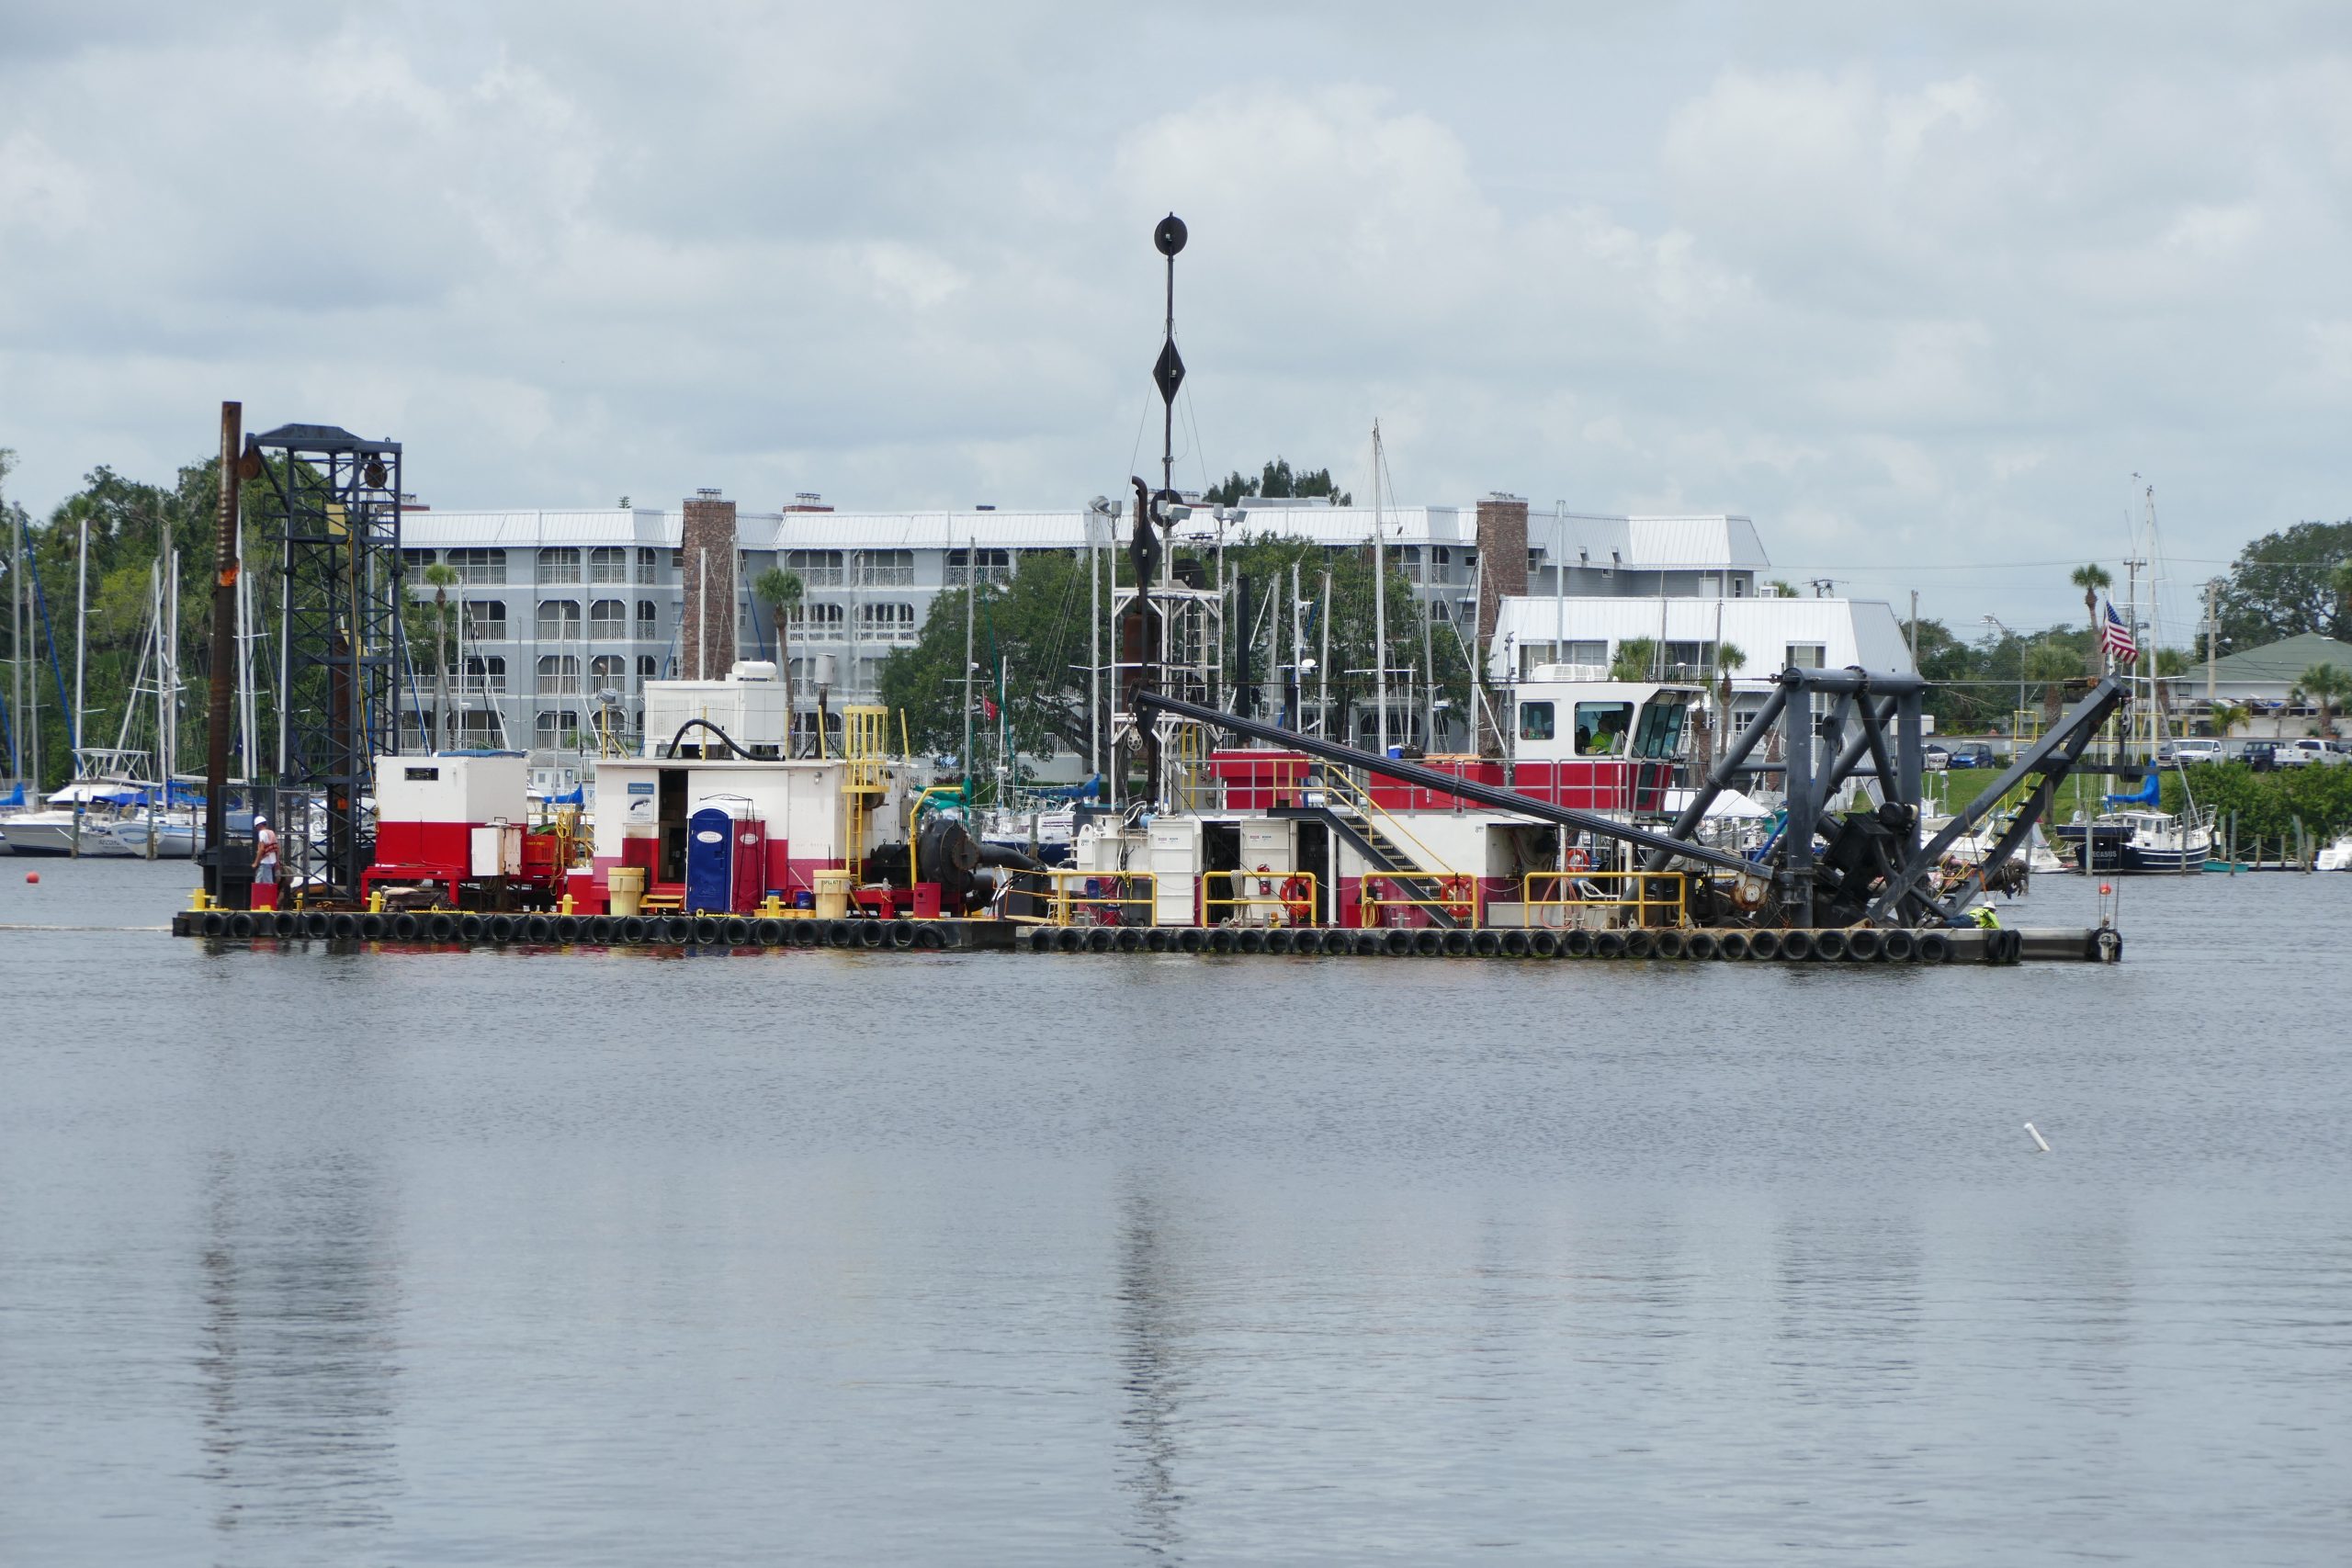 Two Years of Dredging Removes Decades of Muck from Florida’s Eau Gallie River